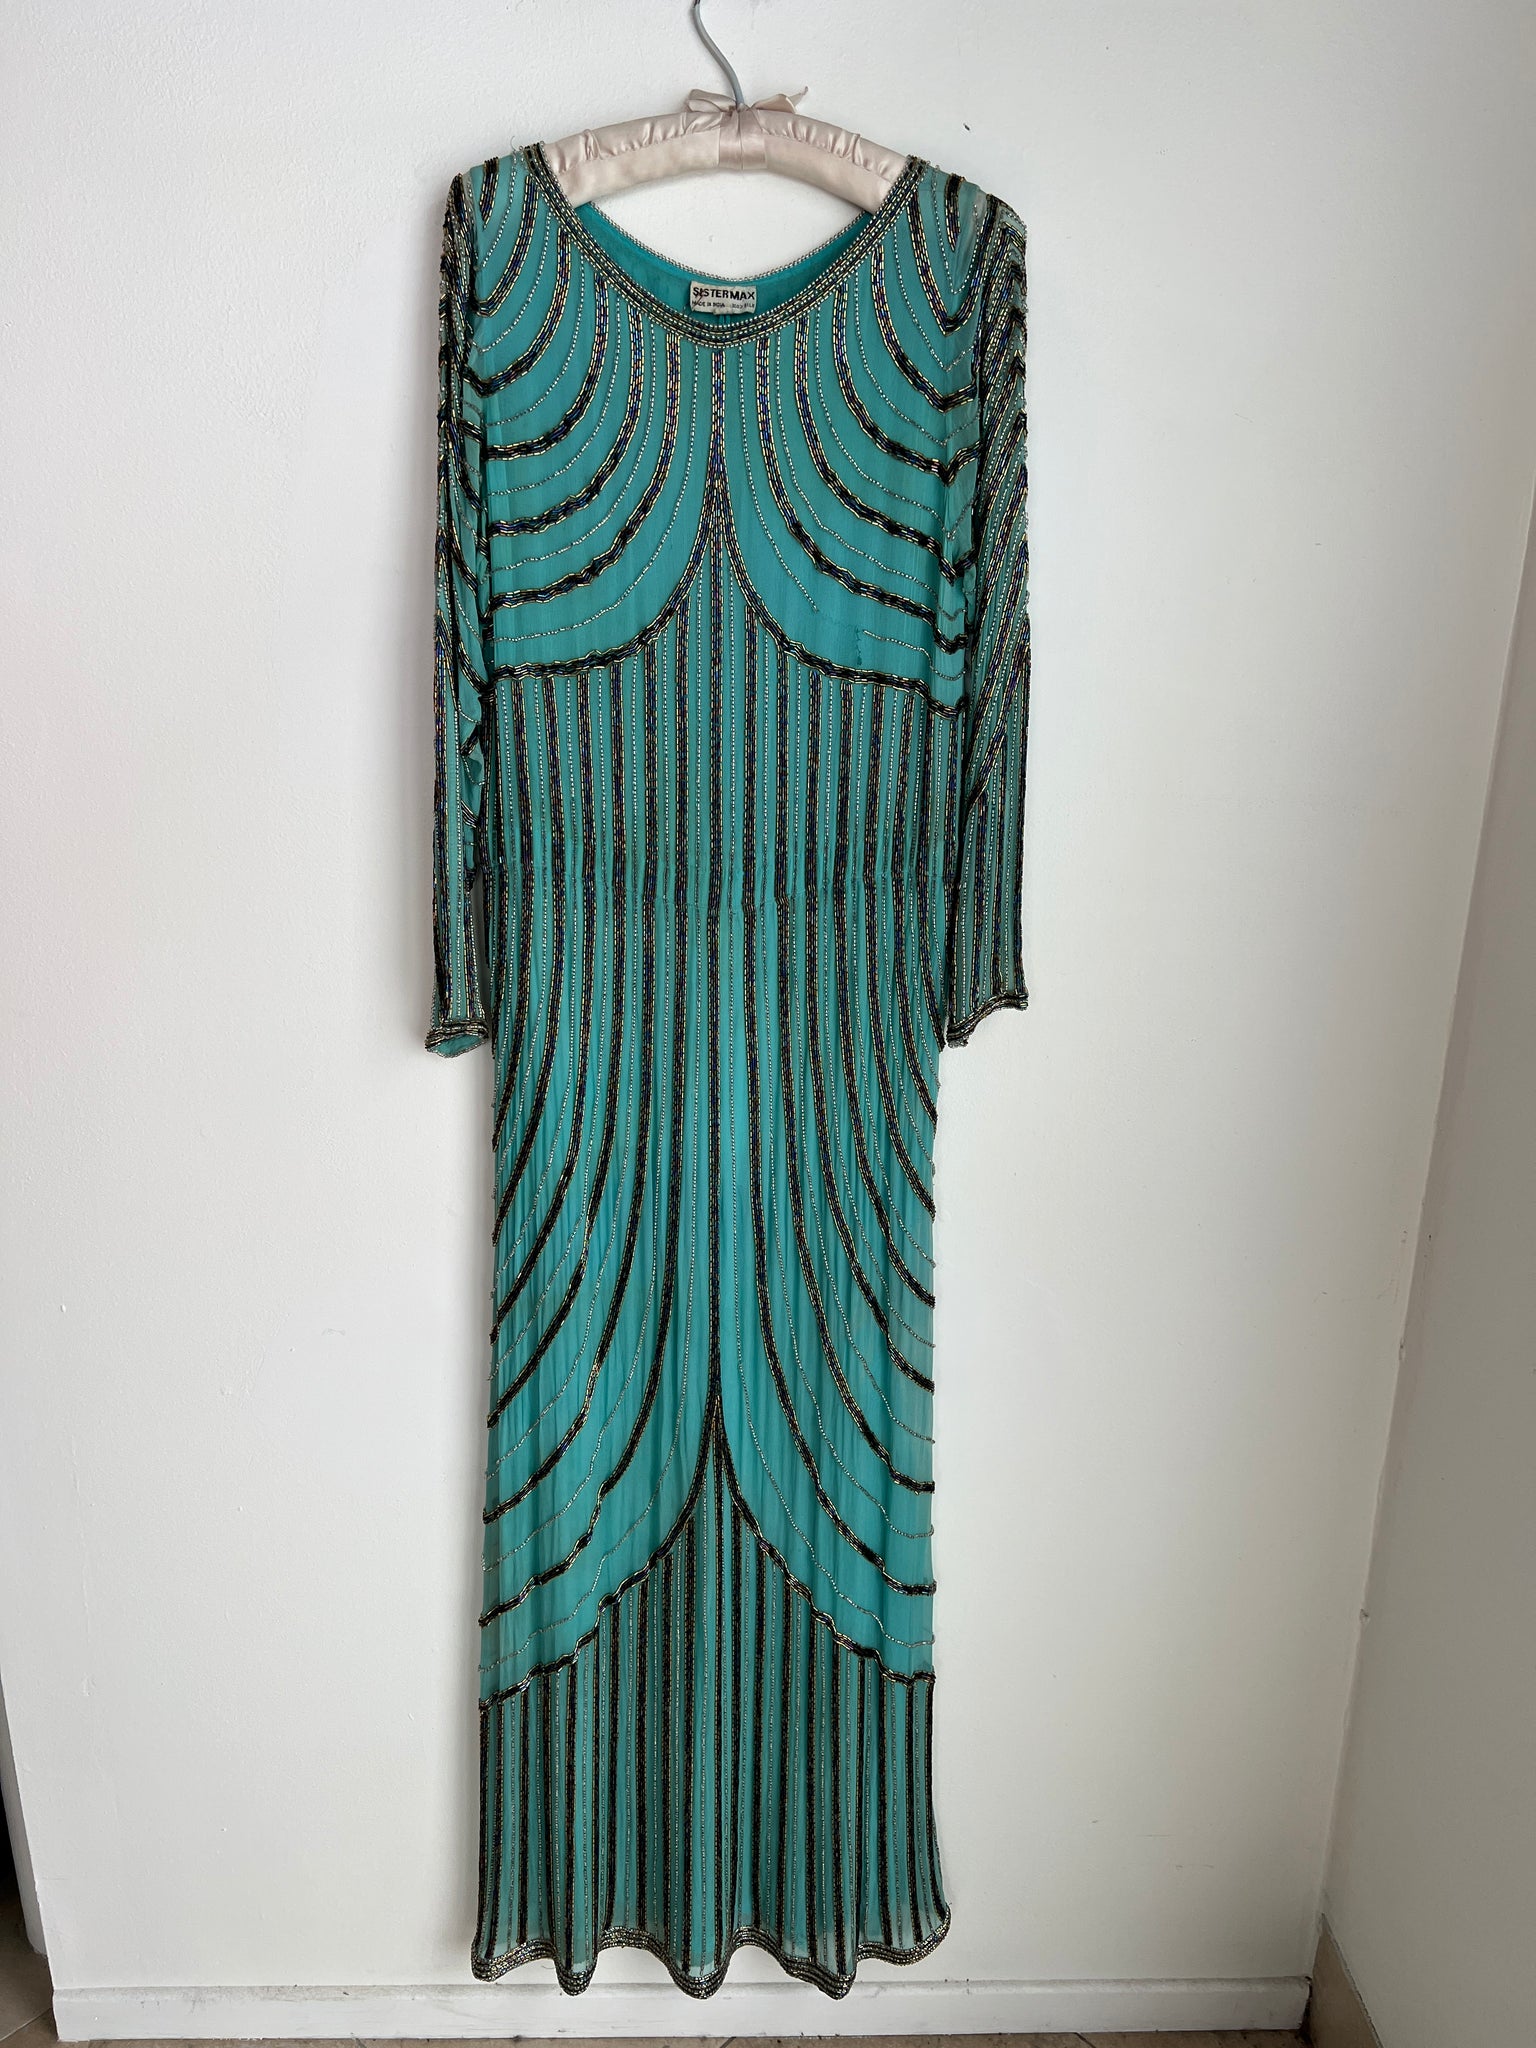 1960s DRESS- Sister Max mint green beaded gown